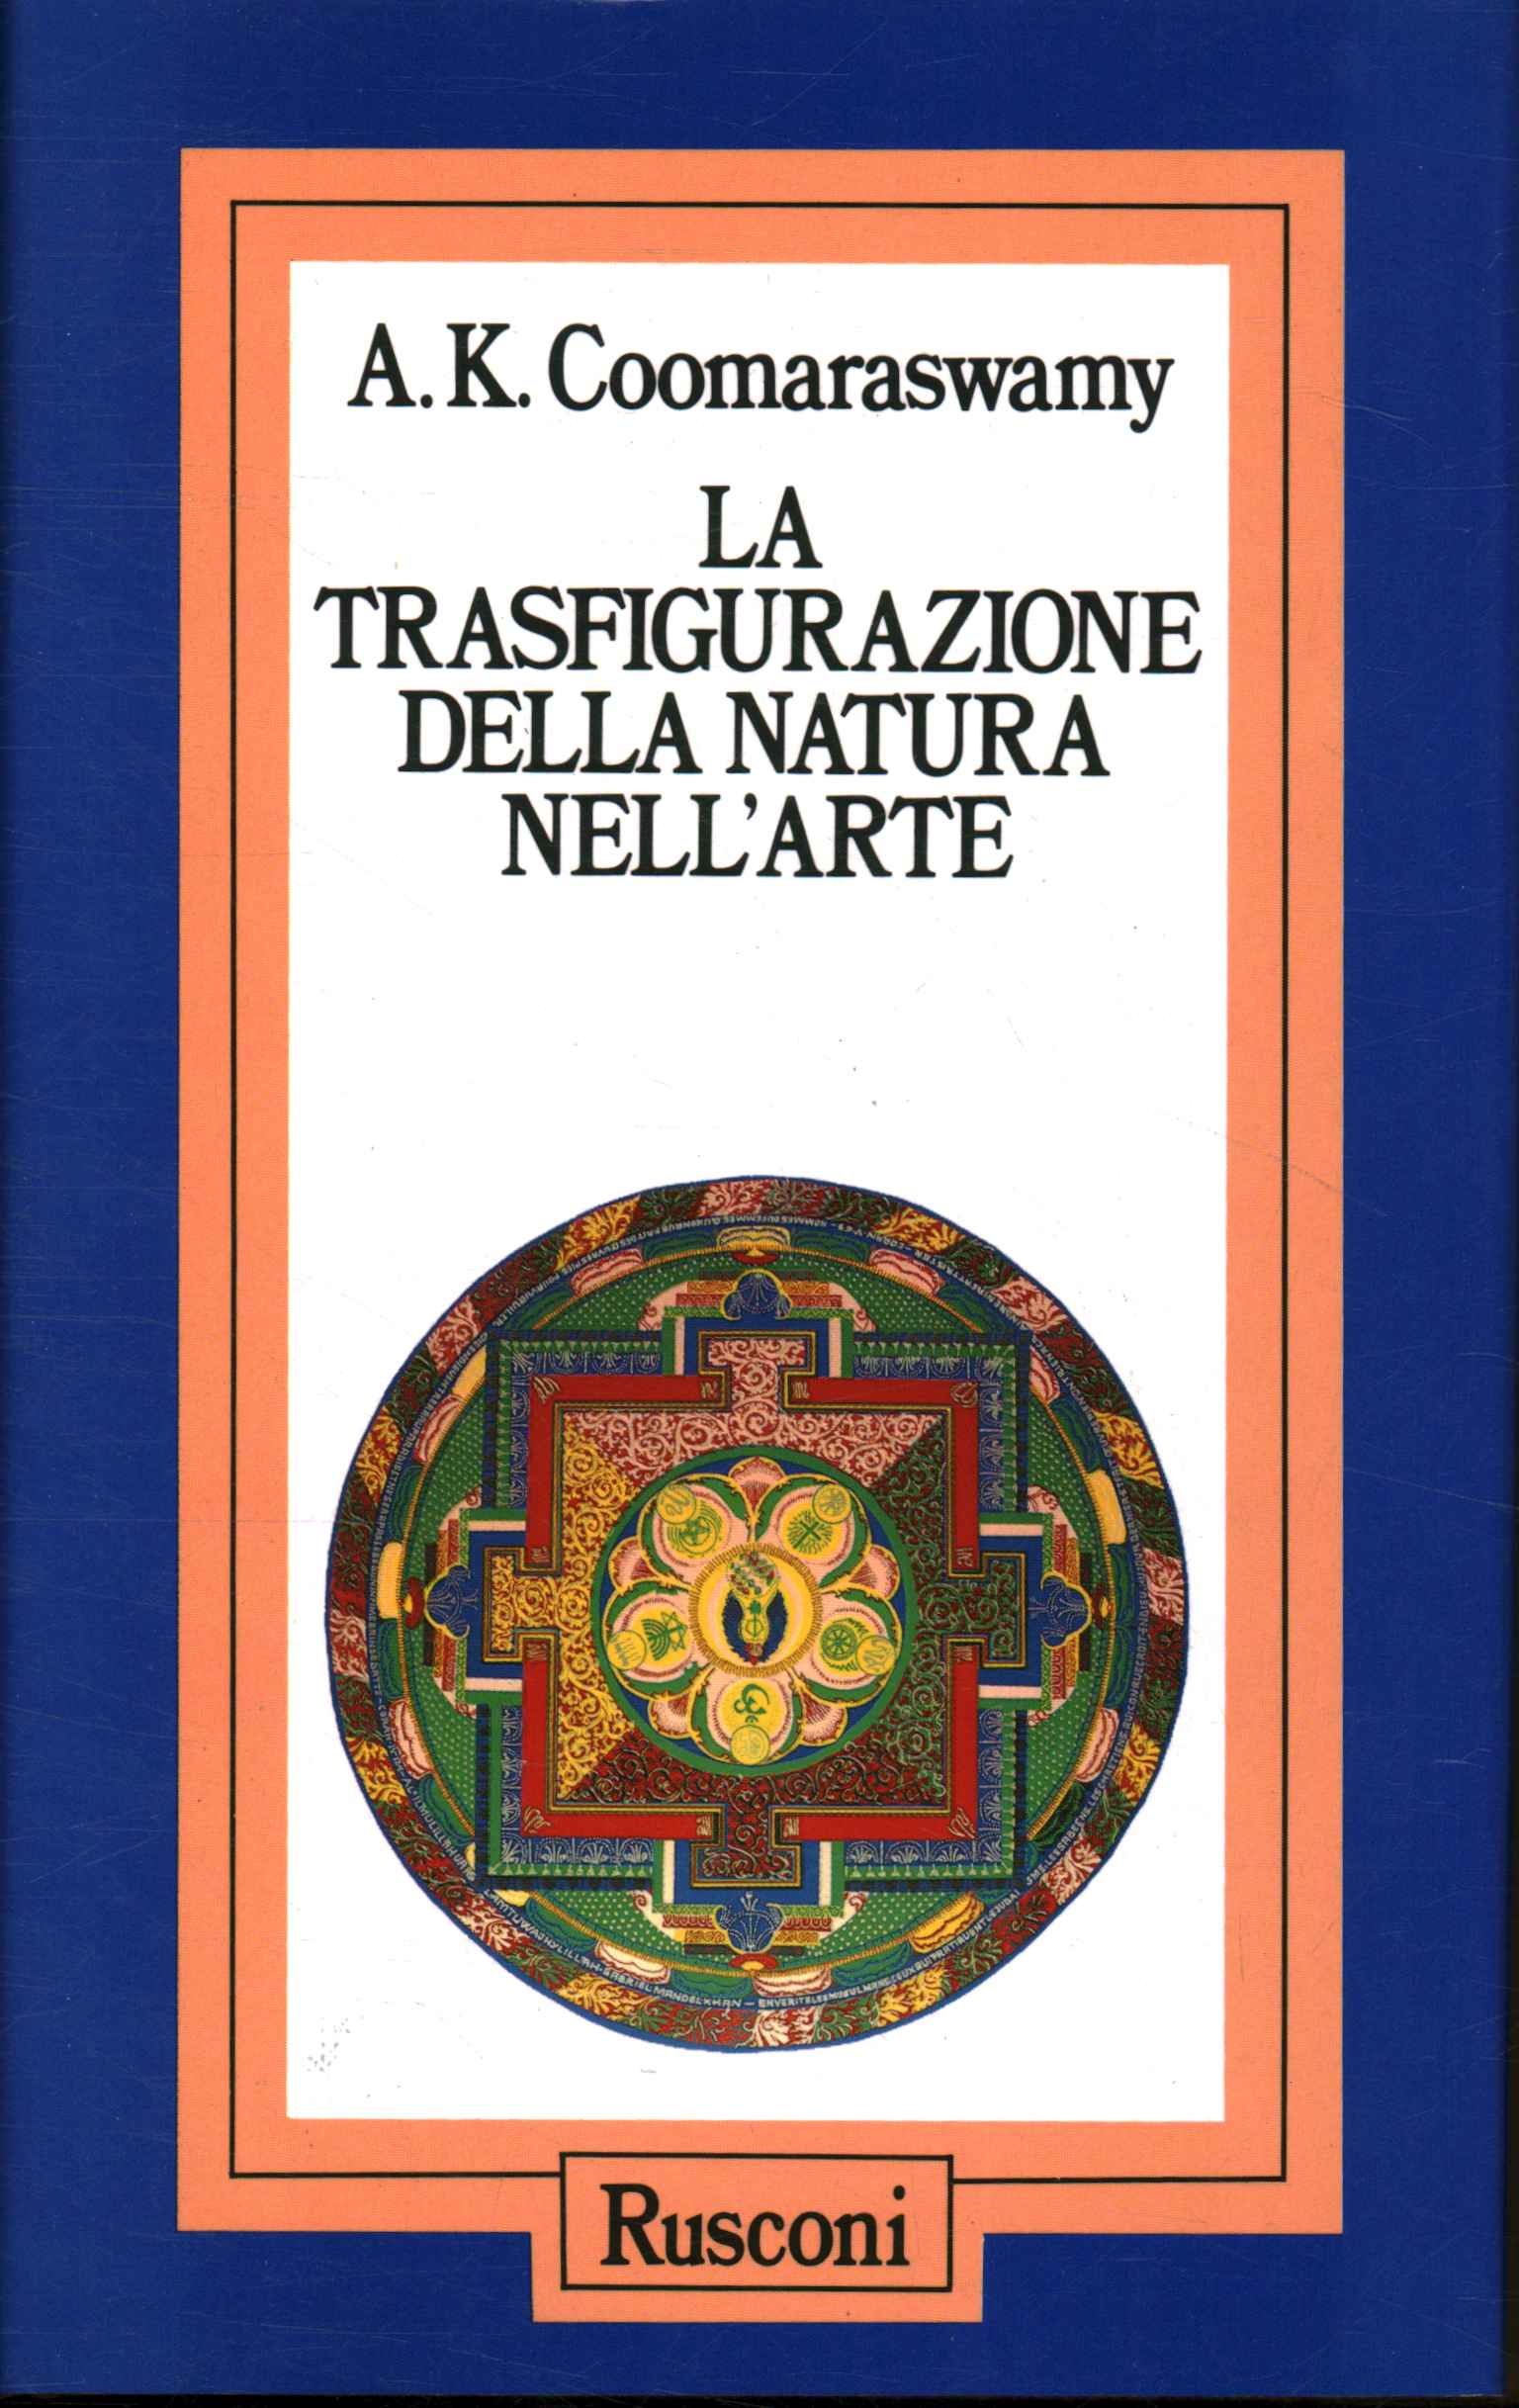 The transfiguration of nature in the apostle